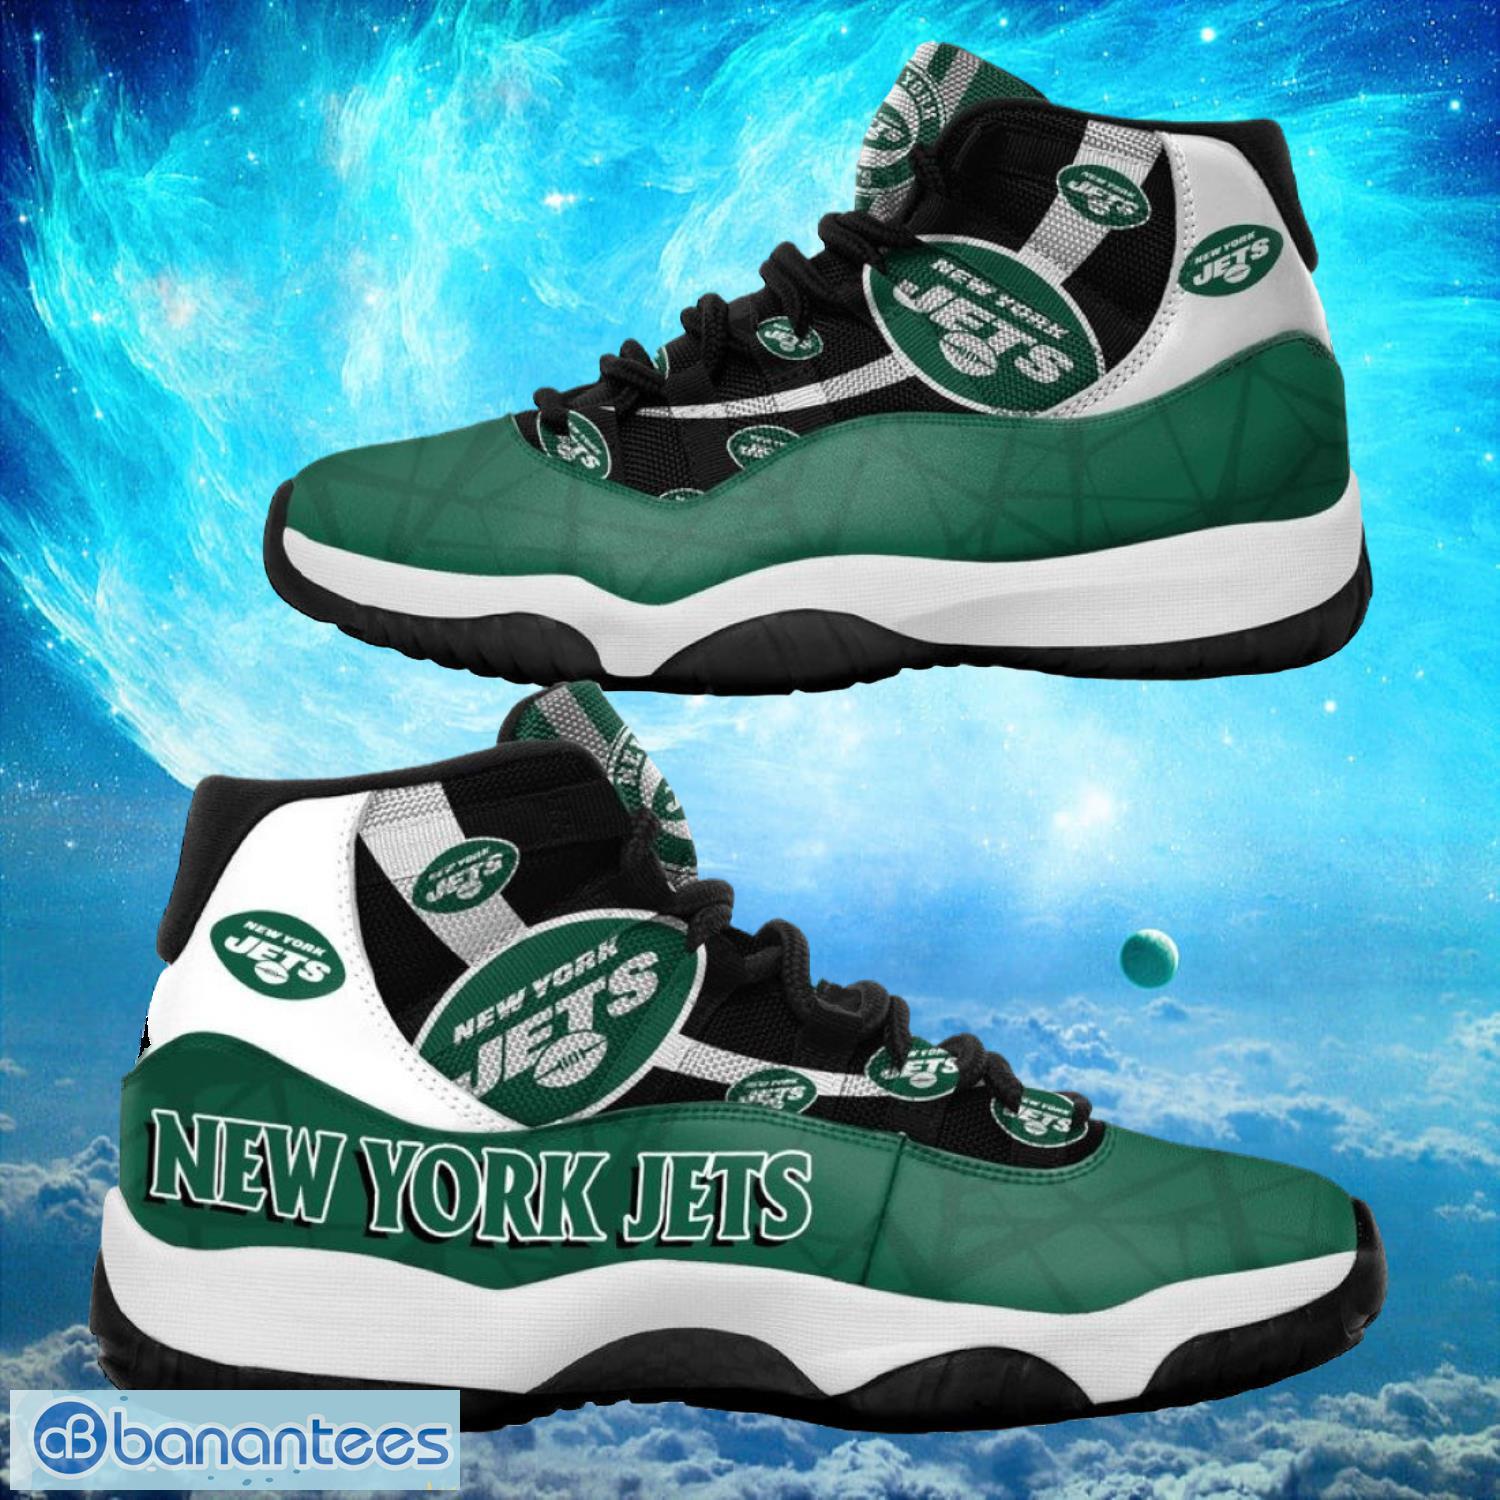 New York Jets NFL Air Jordan 11 Sneakers Shoes Gift For Fans Product Photo 1